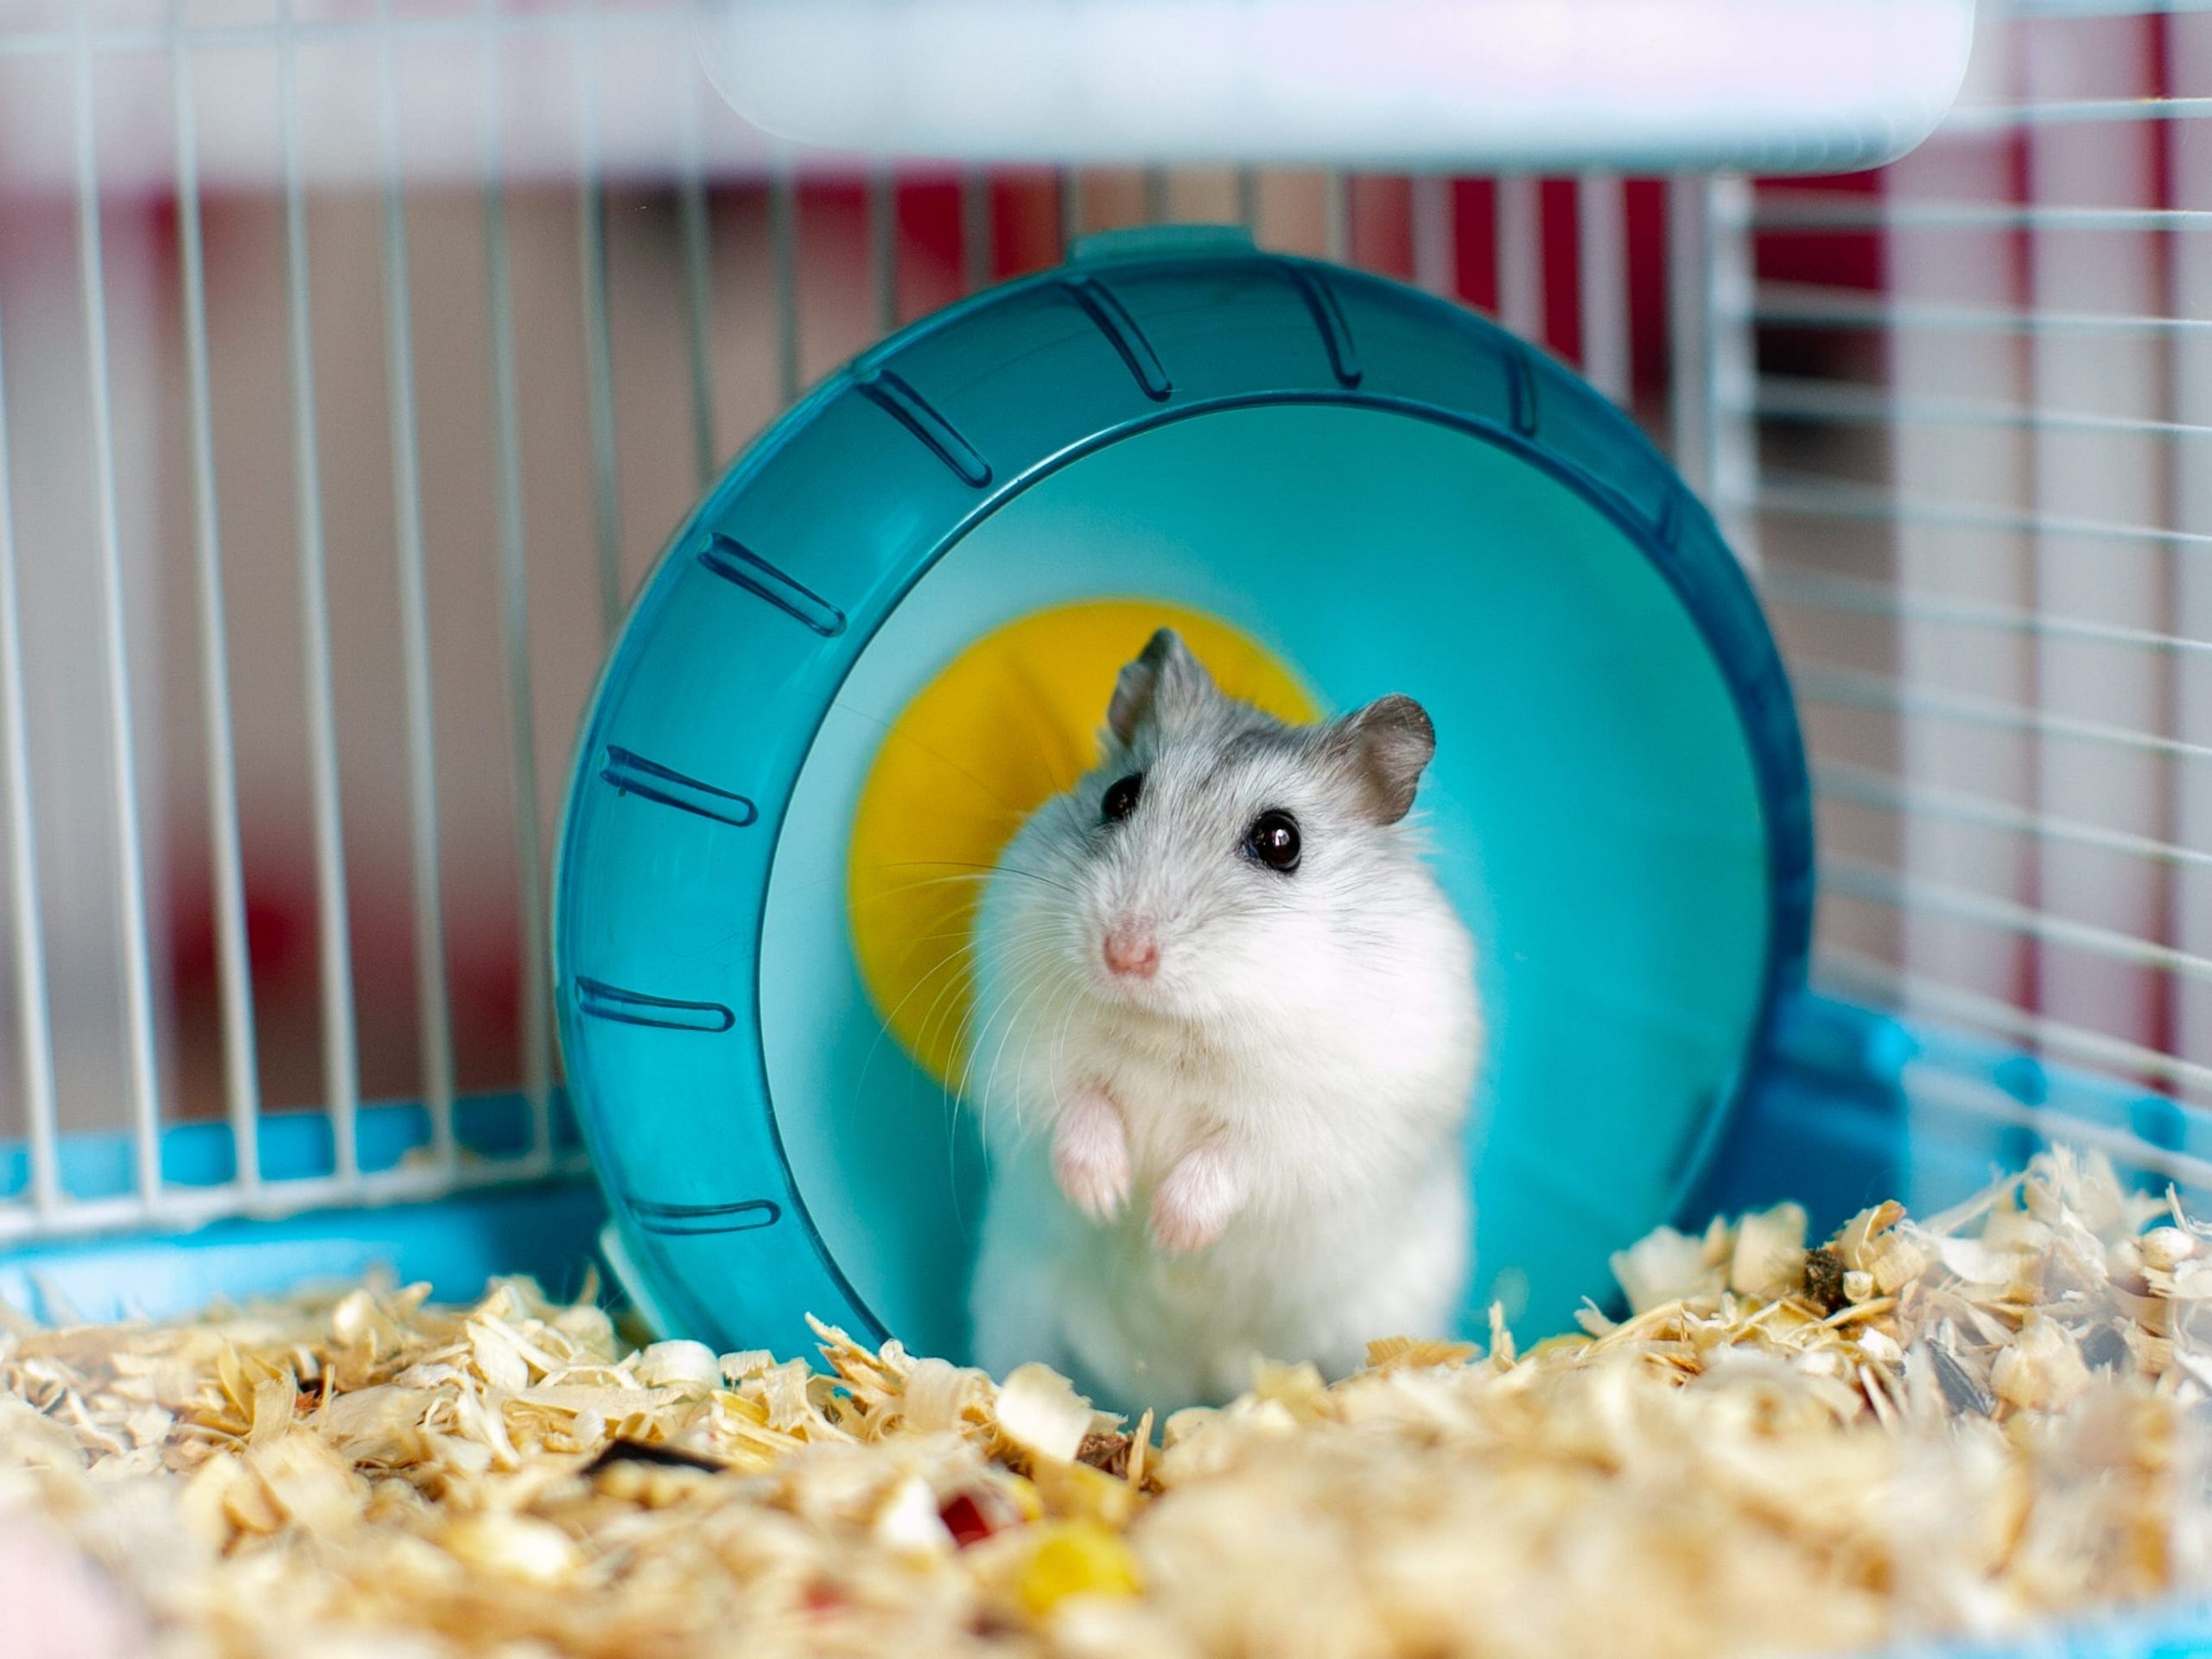 Light hamster in a caged wheel